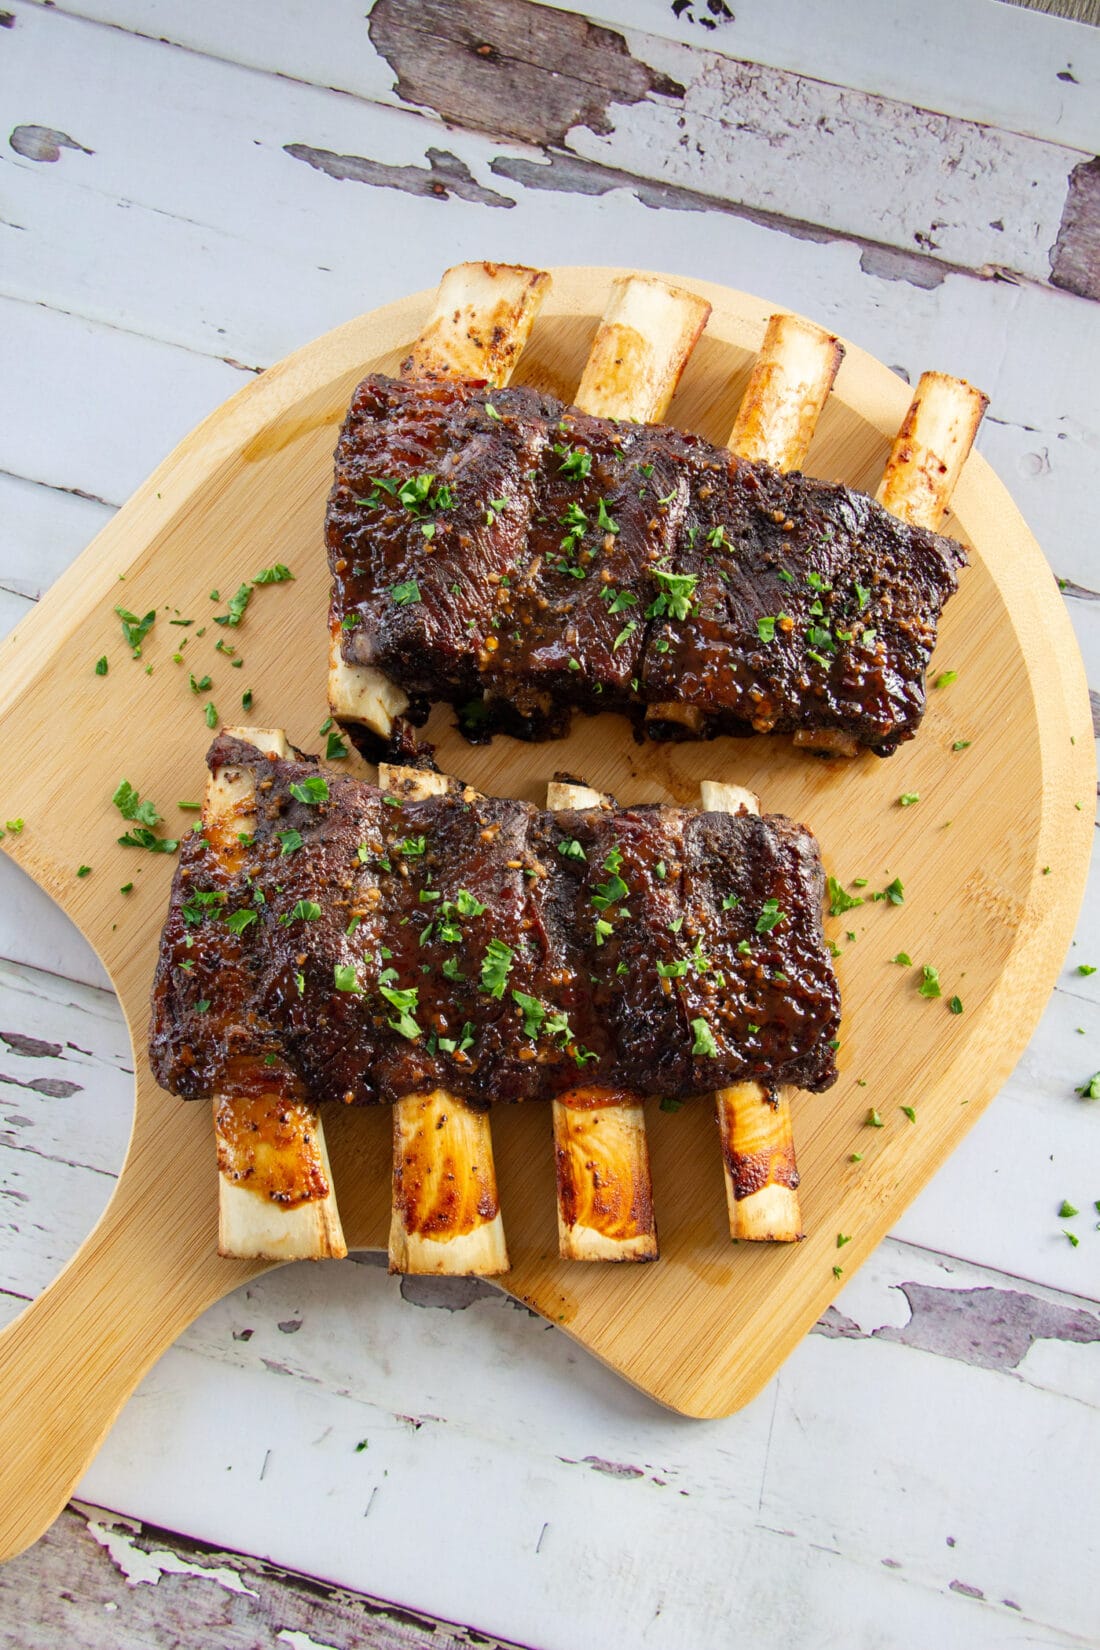 Beef Ribs made in the oven on a wood baord